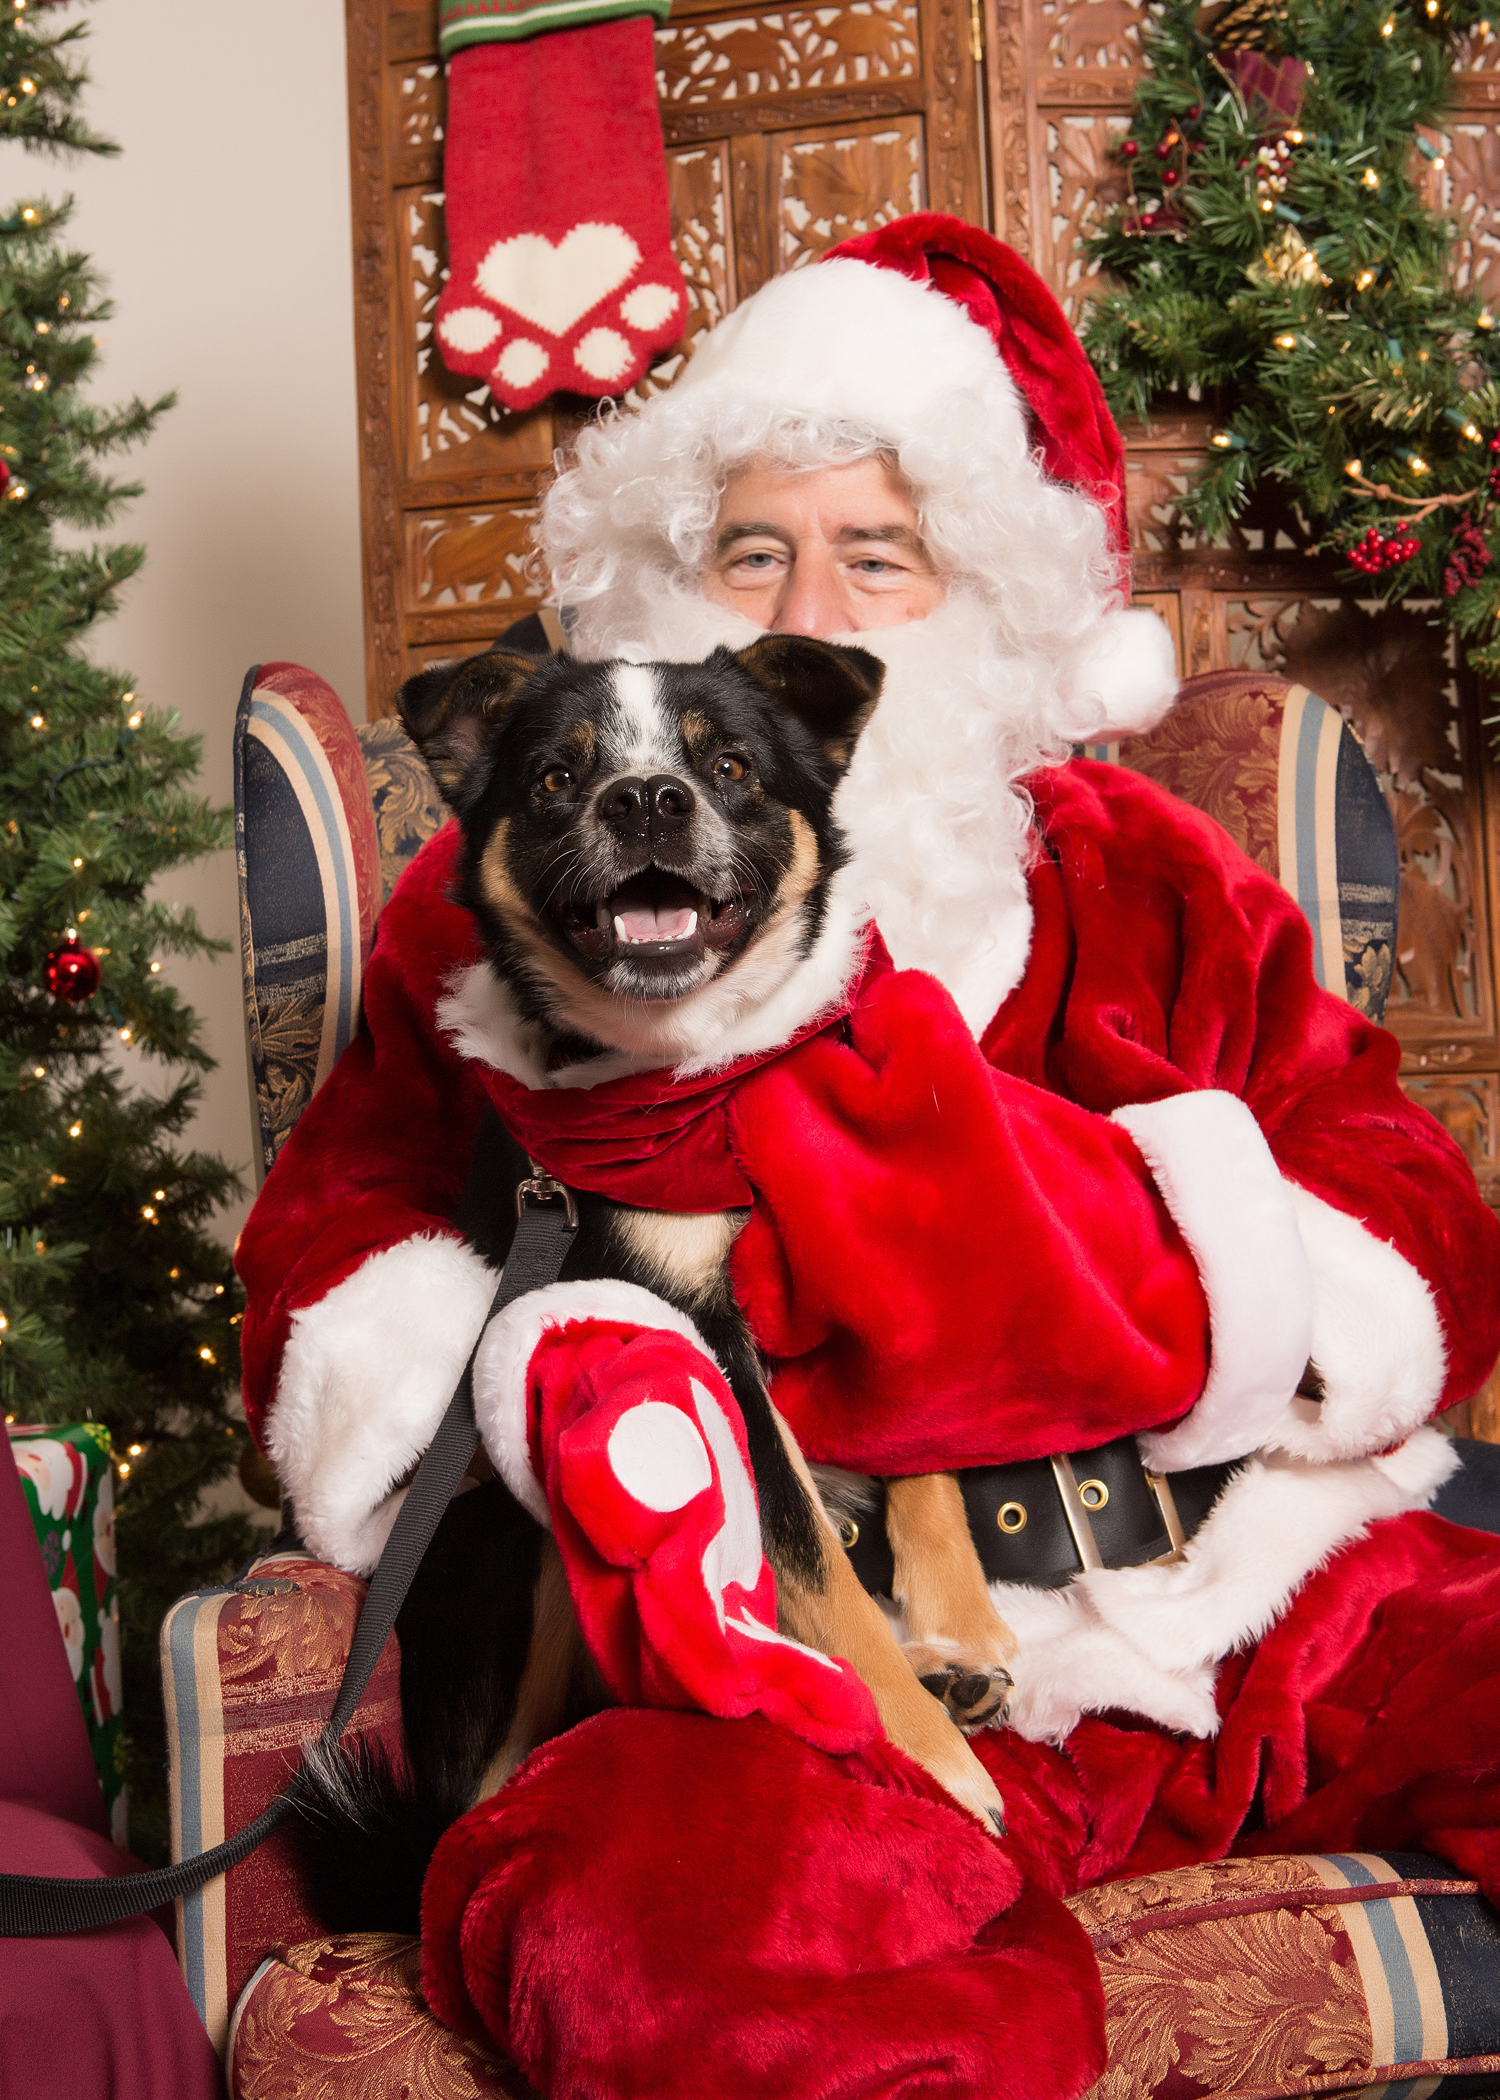 Santa hopes to fulfill Pumba's wish for a forever home